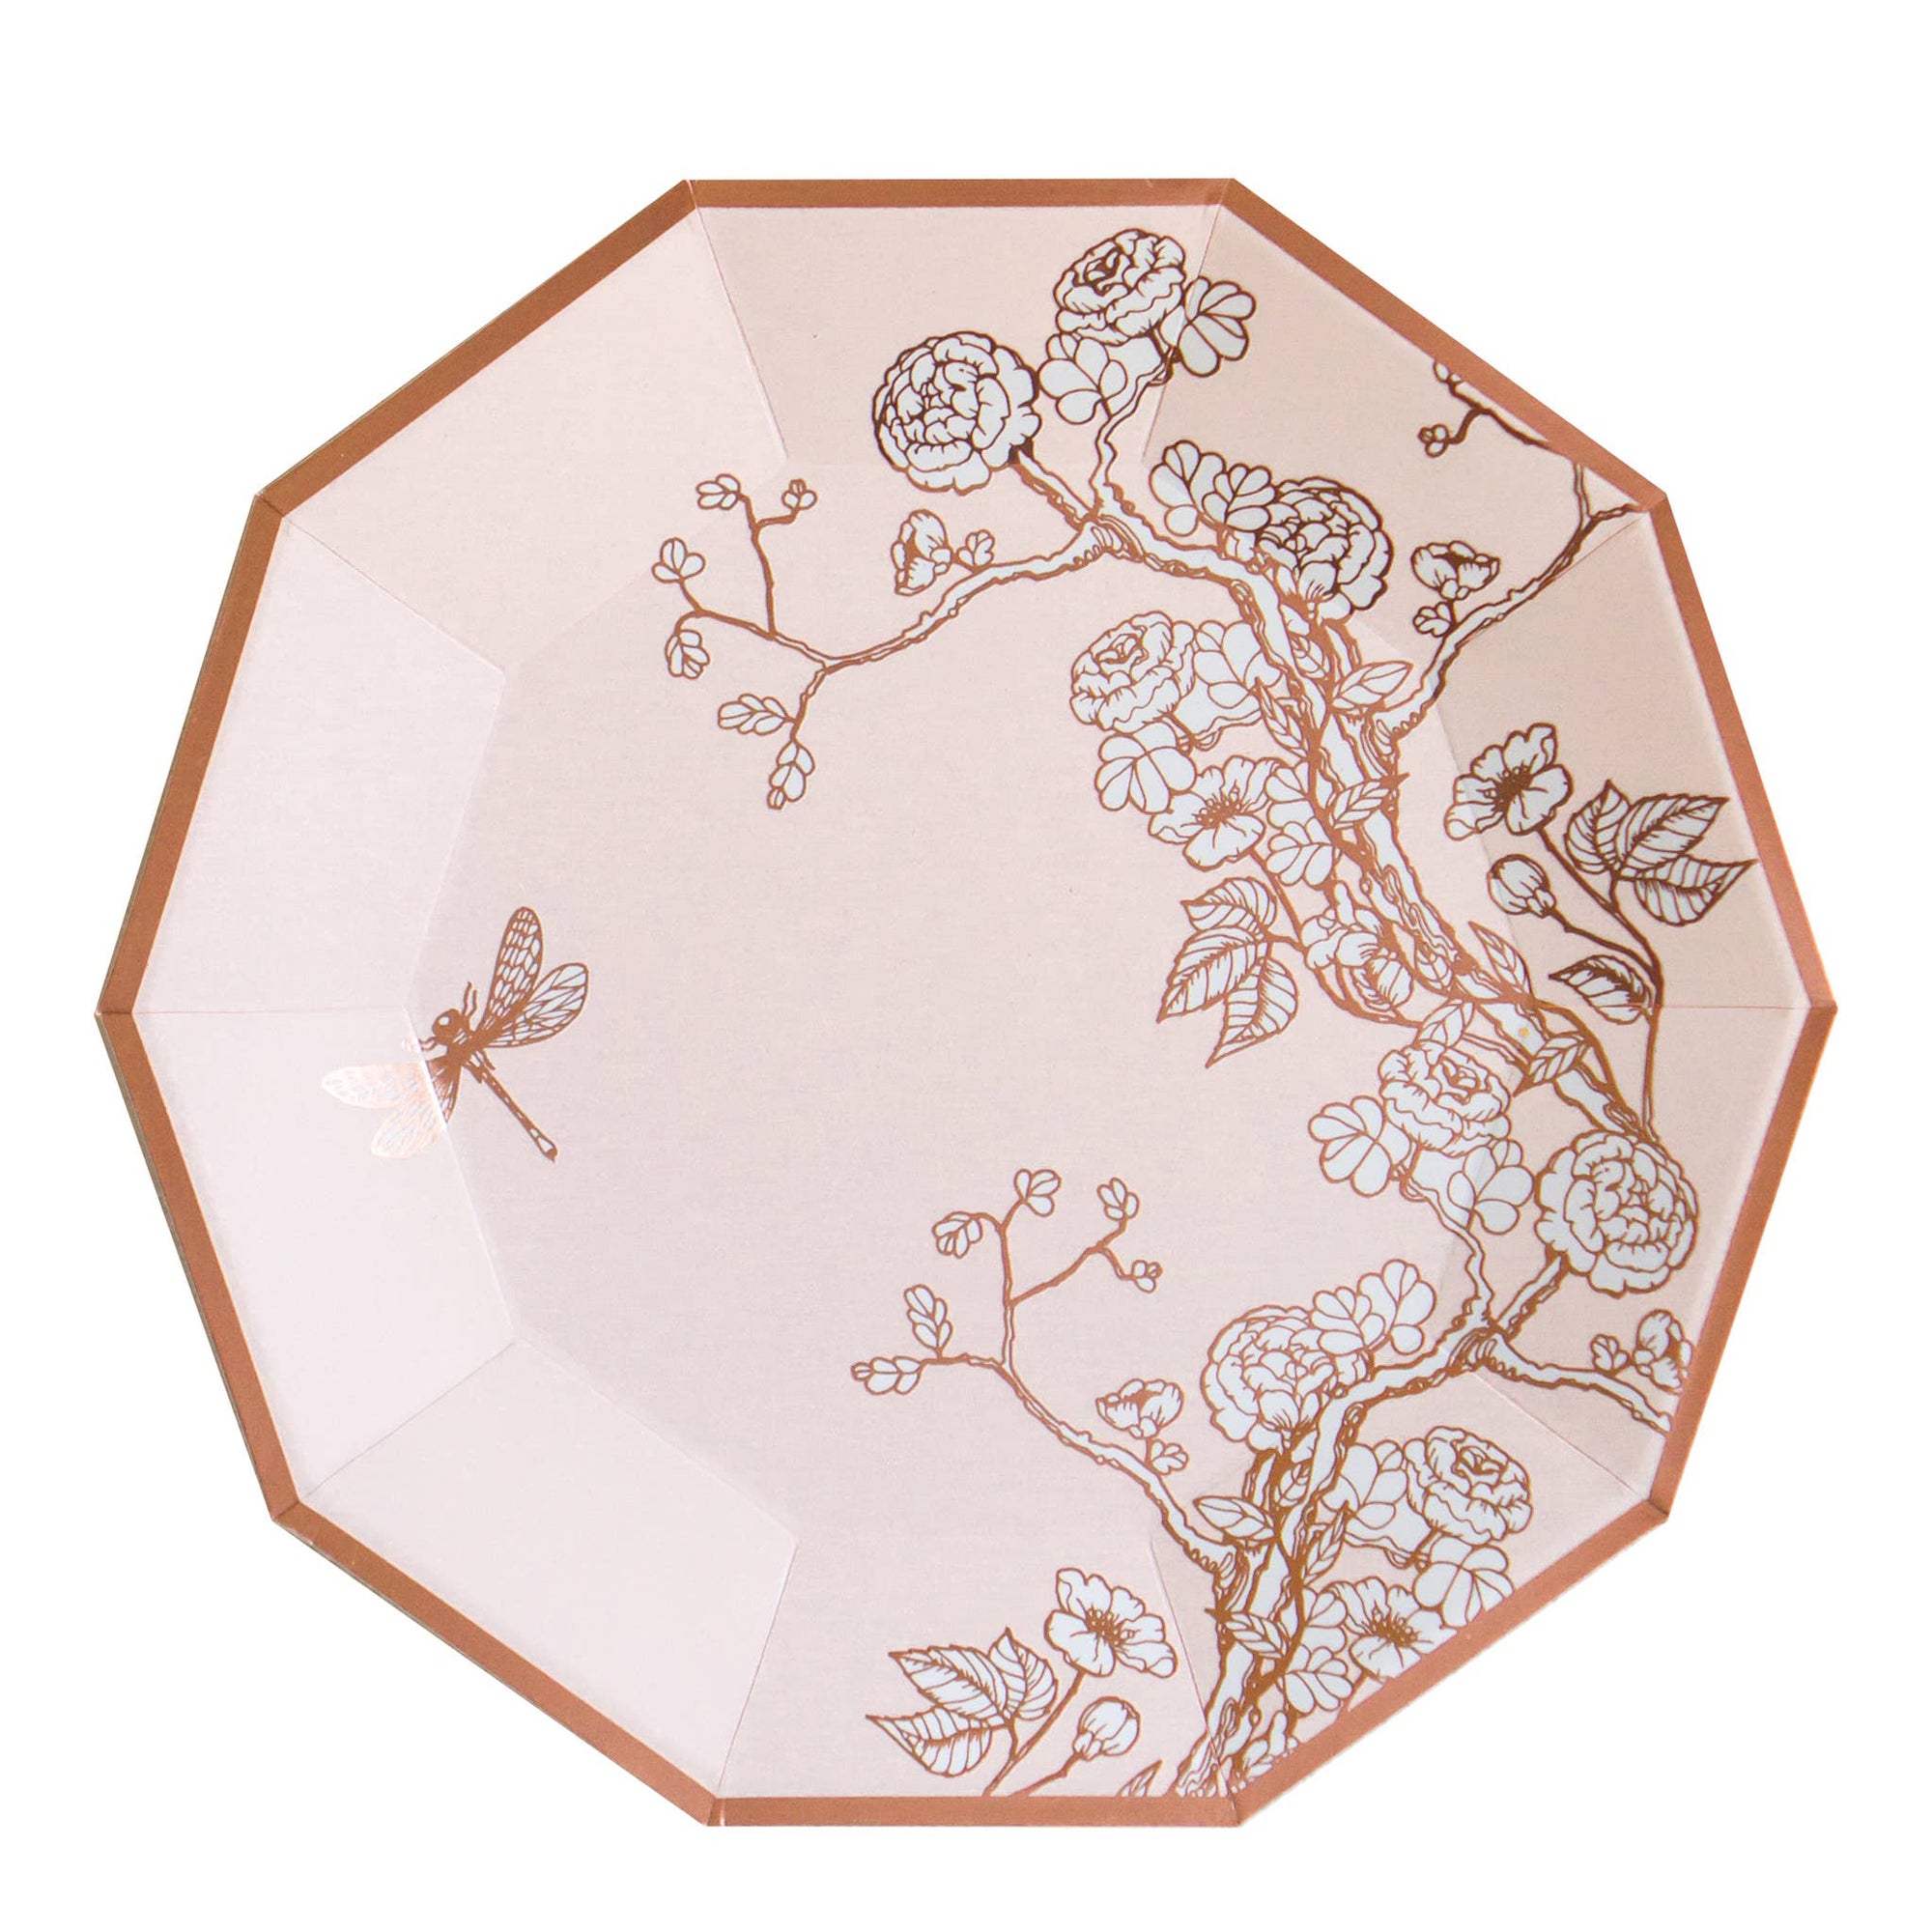 Jardin - Pale Pink Floral Premium Large Paper Plates - Harlow & Grey Tableware - Retro Style Tea Party Paper Plates, Kids Party Tableware, Pink Blush Baby Shower, Spring Garden Party Plates